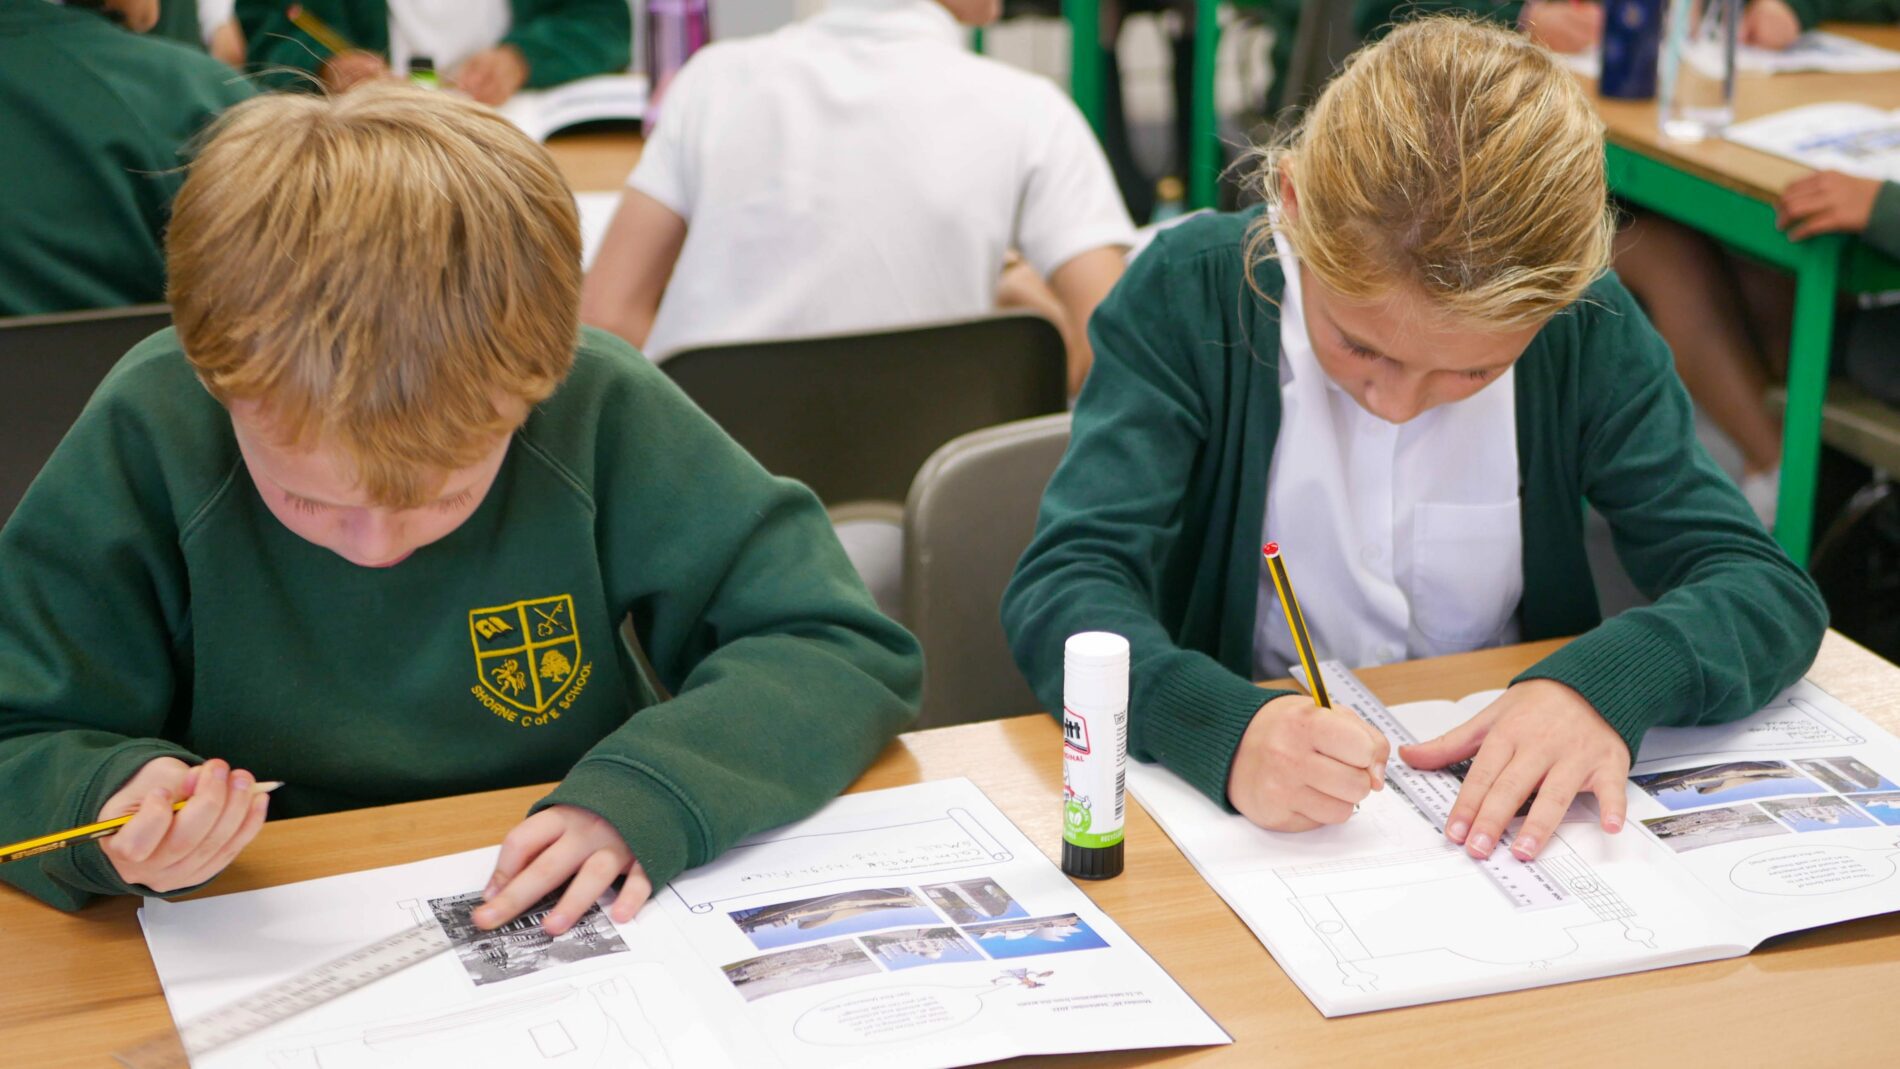 year 6 pupils learning how to draw buildings in art lesson